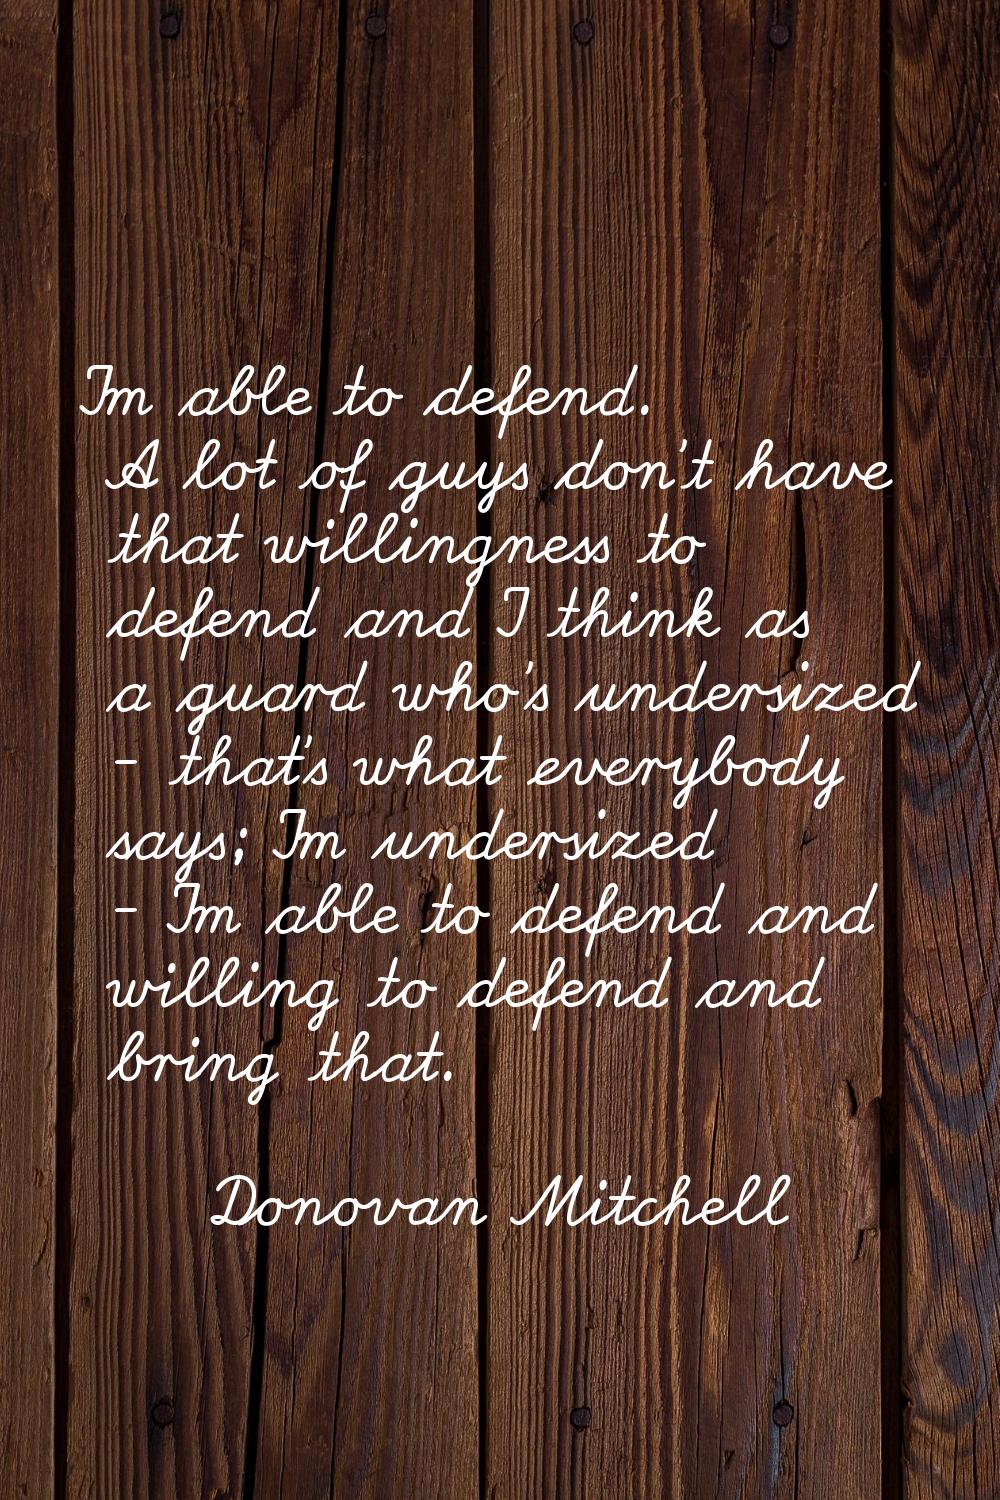 I'm able to defend. A lot of guys don't have that willingness to defend and I think as a guard who'